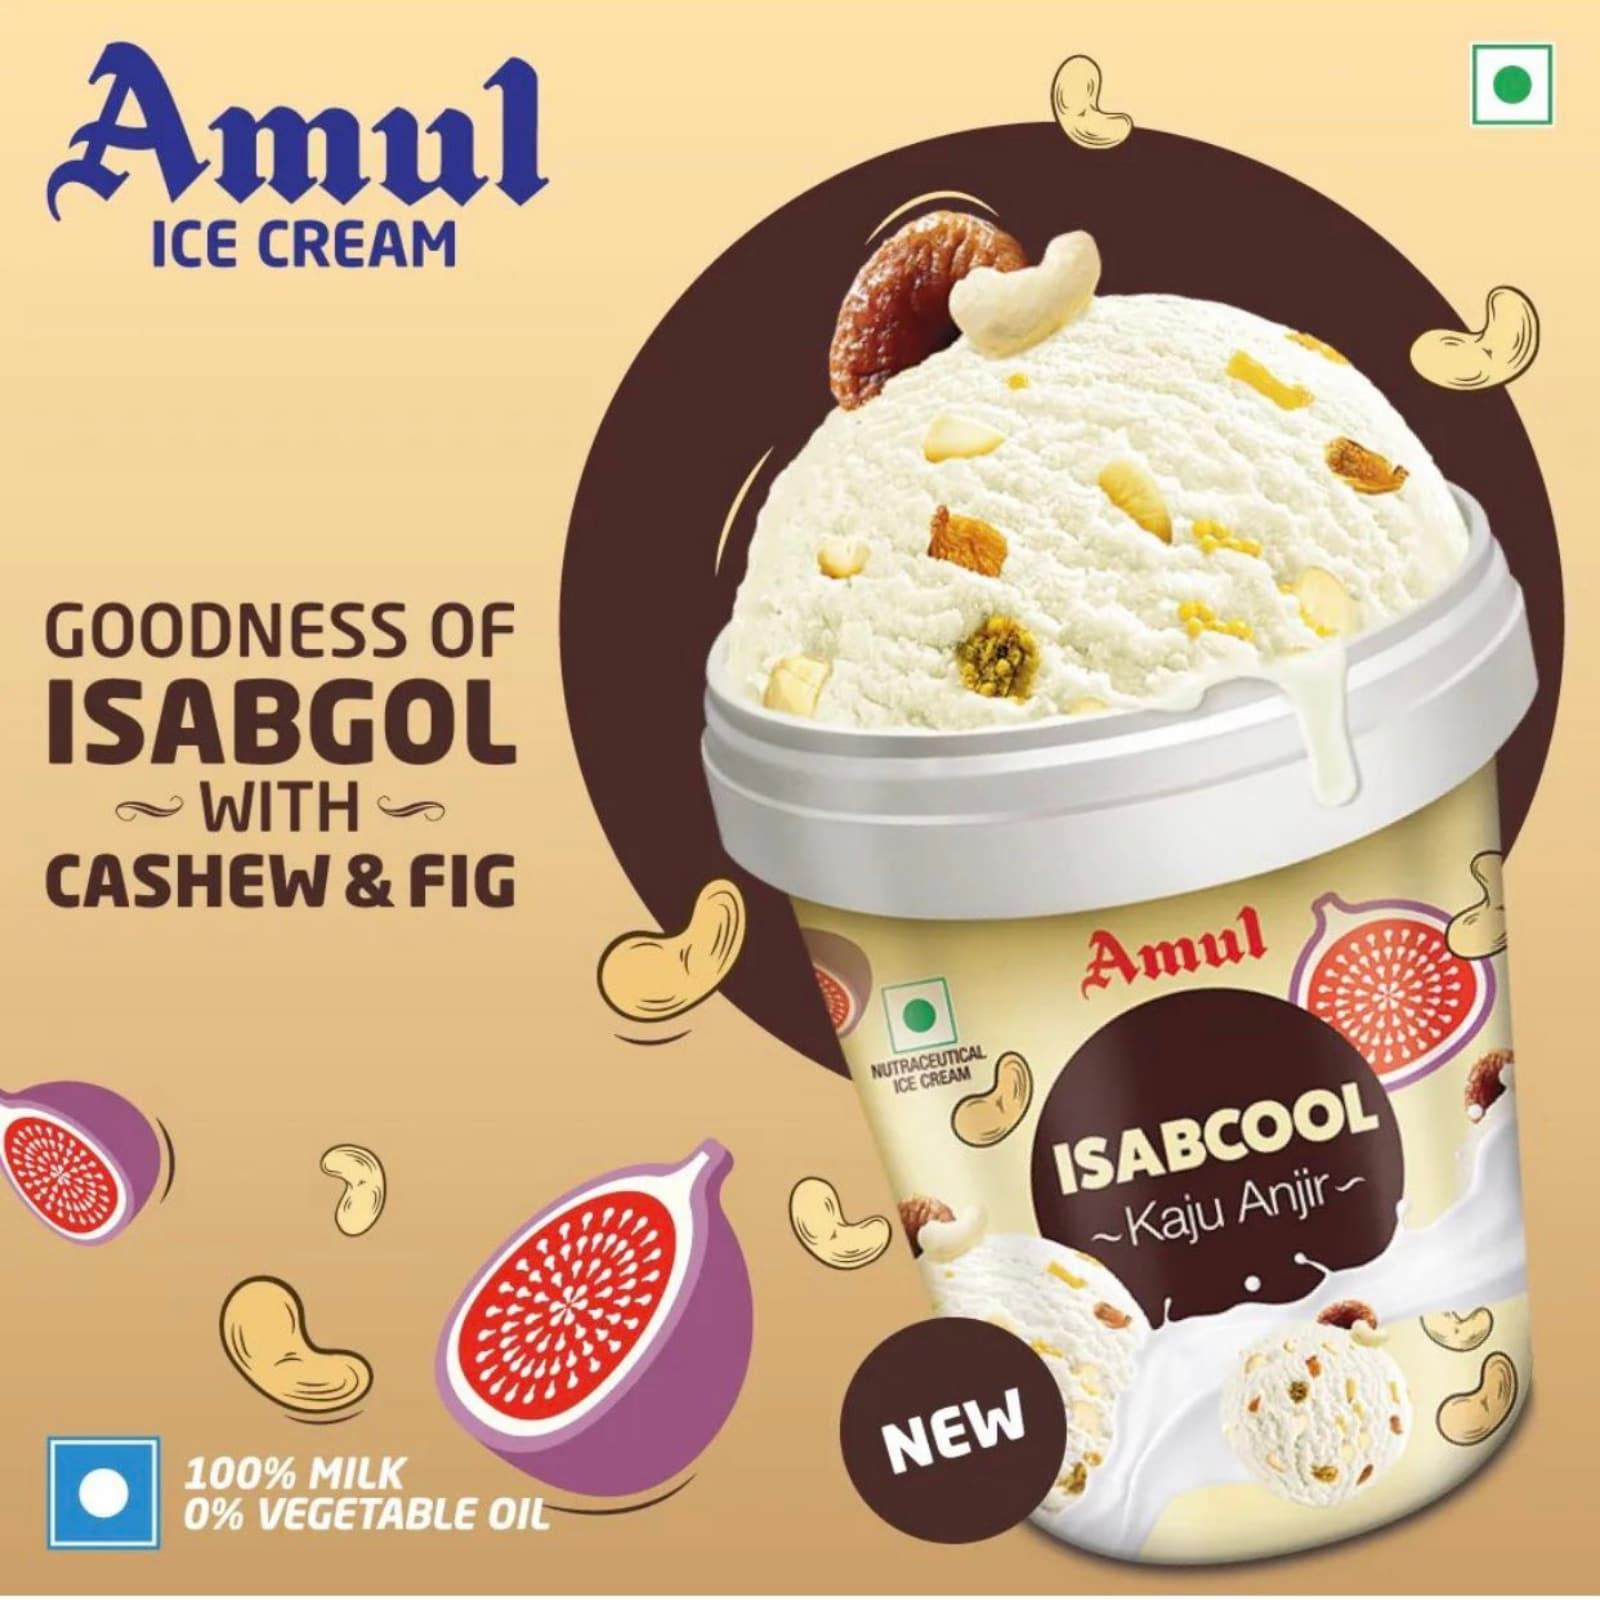 Amul Launches Ice Cream Made with Isabgol, Cashews and Anjeer